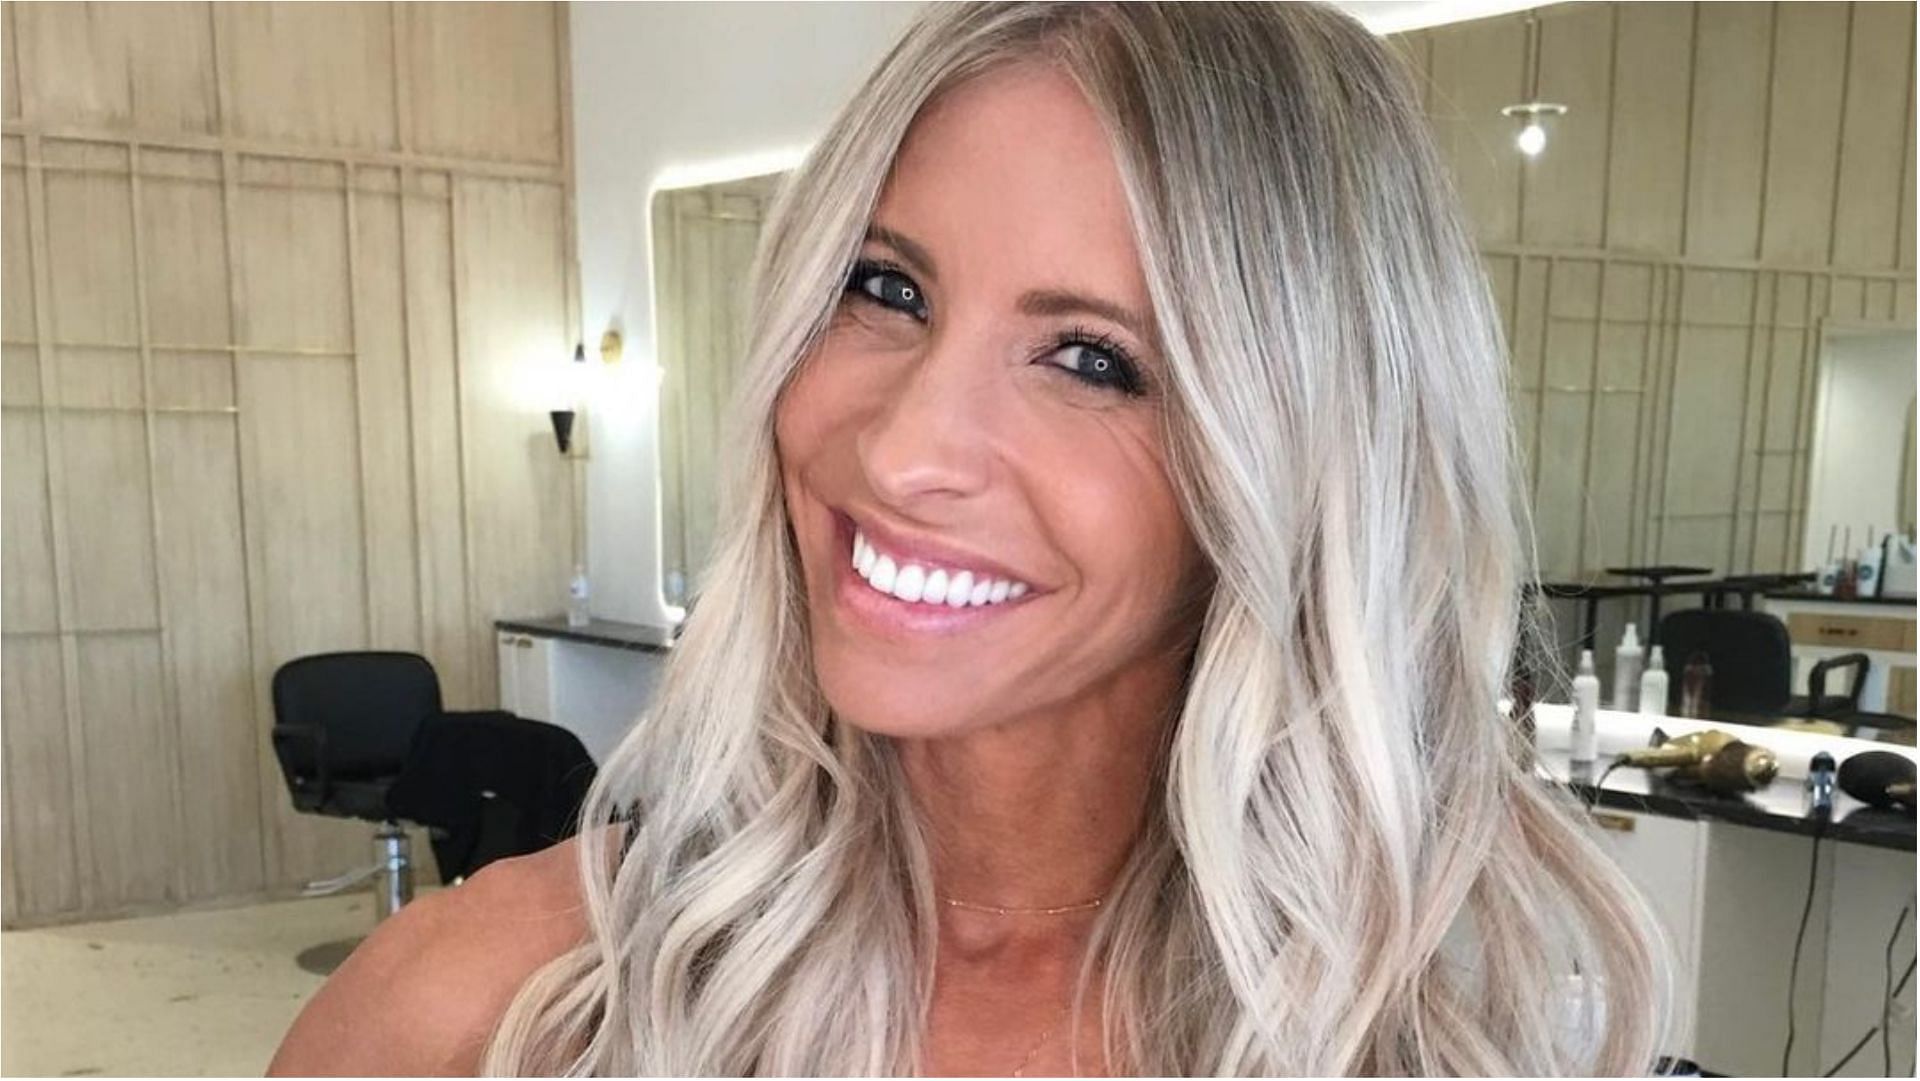 Heidi Powell is a popular name in the world of fitness (Image via realheidipowell/Instagram)